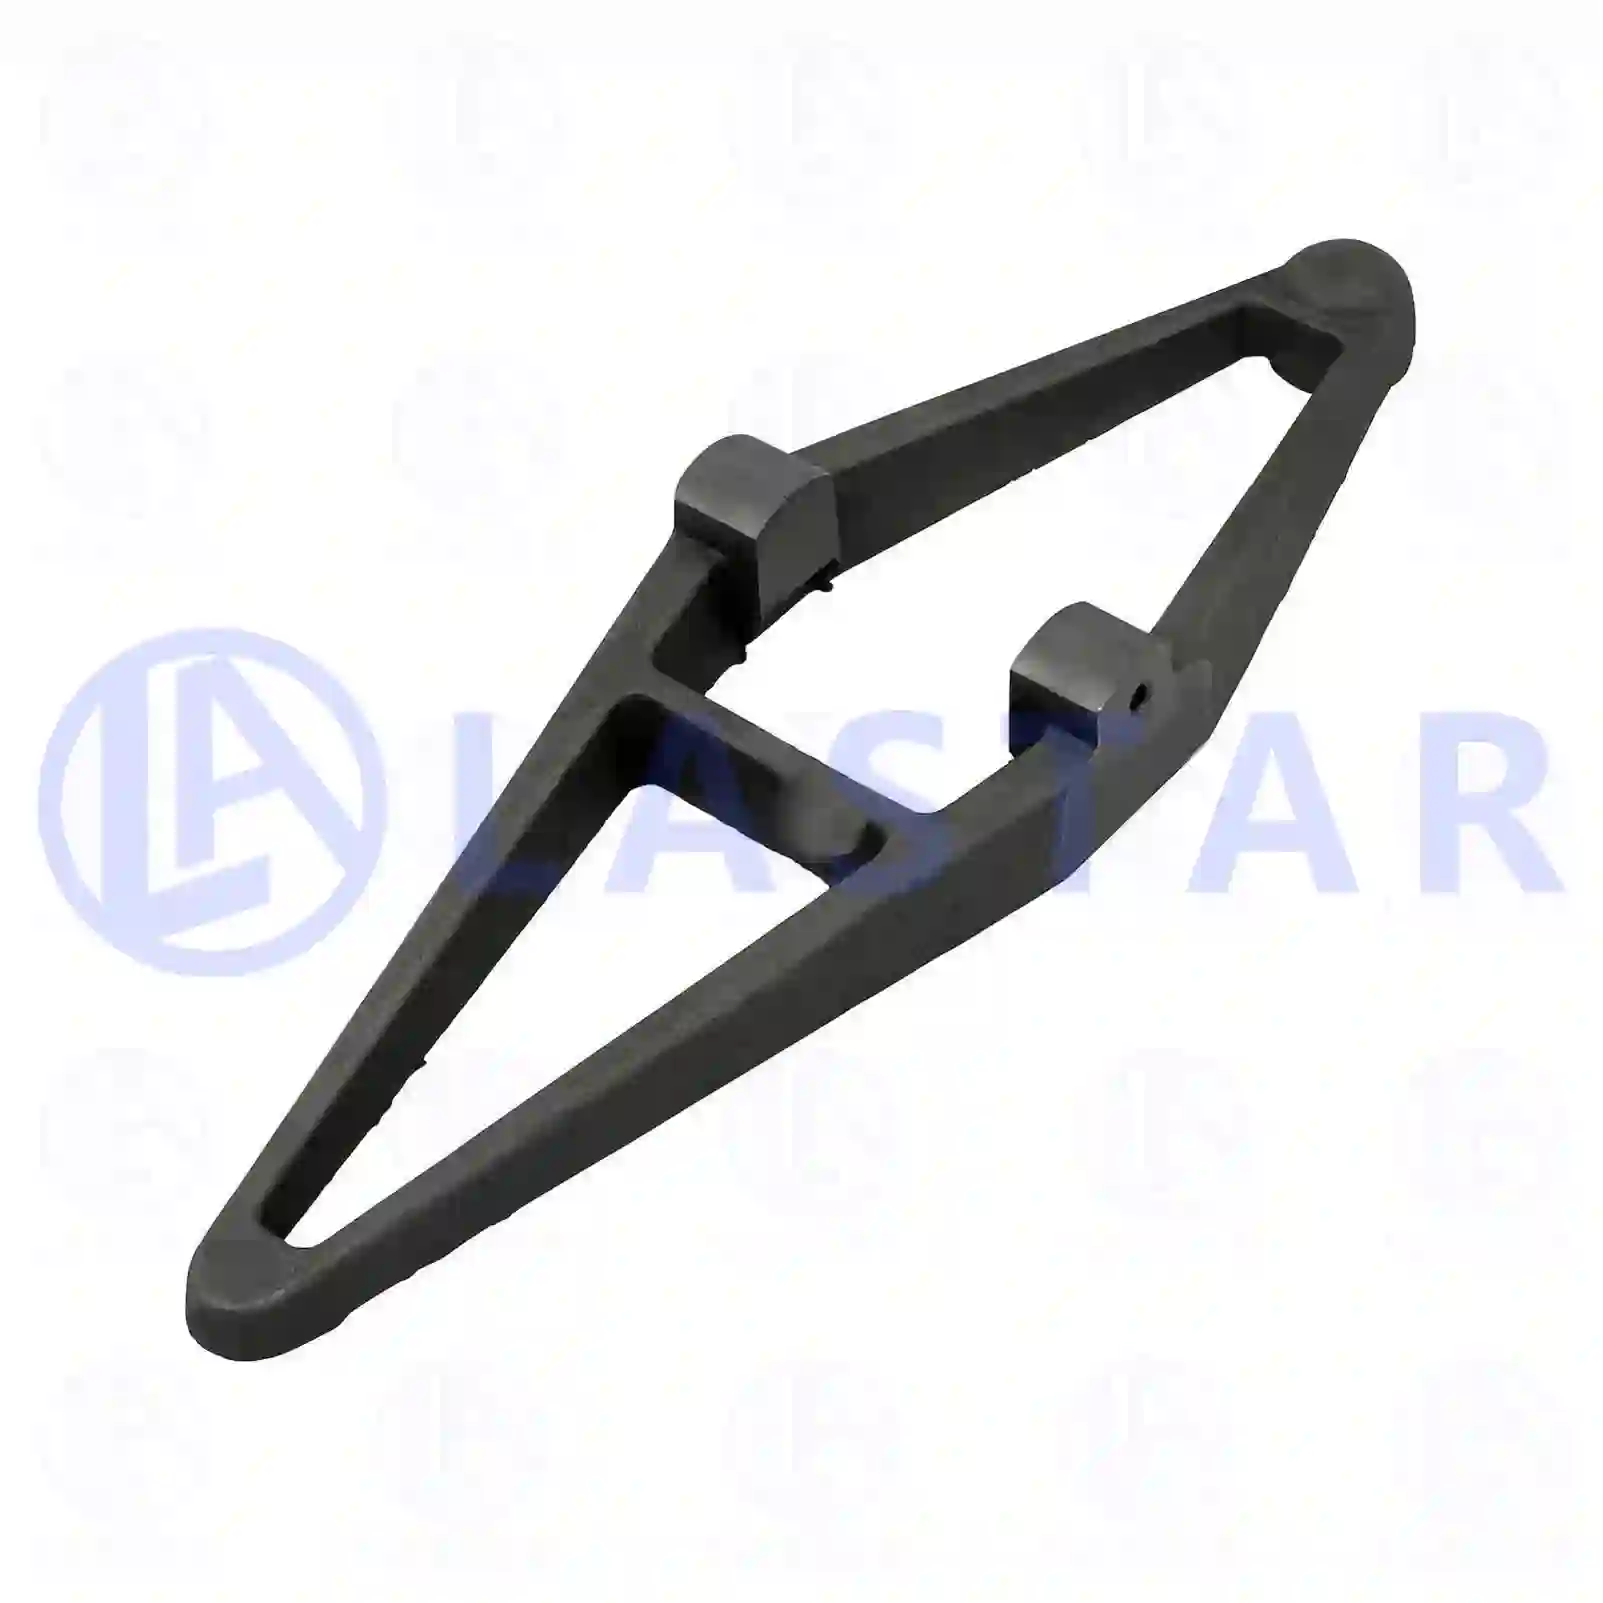 Release lever, 77722689, 1249006, ZG30365-0008 ||  77722689 Lastar Spare Part | Truck Spare Parts, Auotomotive Spare Parts Release lever, 77722689, 1249006, ZG30365-0008 ||  77722689 Lastar Spare Part | Truck Spare Parts, Auotomotive Spare Parts